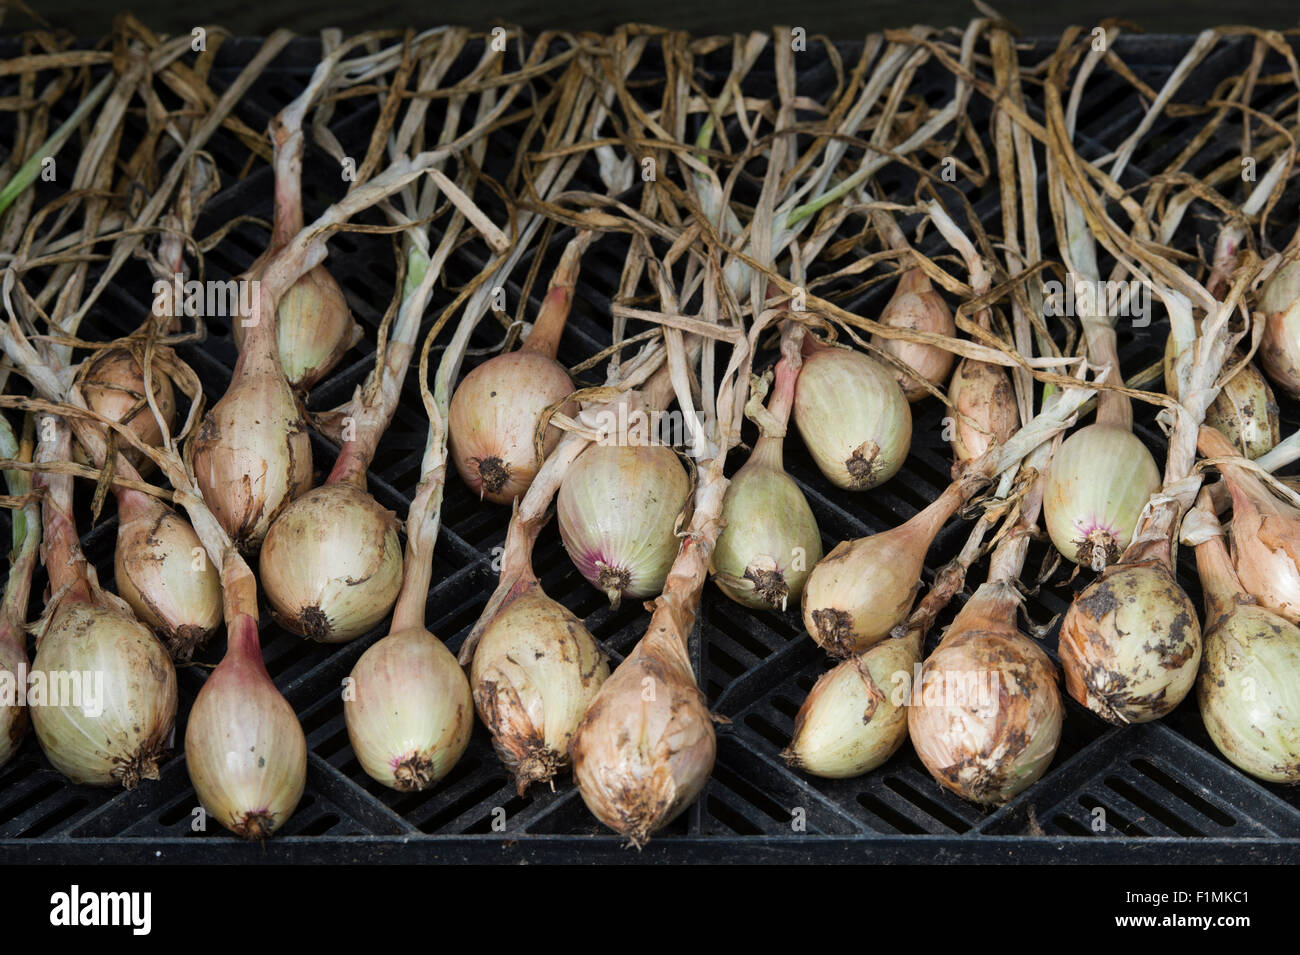 Allium cepa aggregatum 'Red gourmet', Shallots . Drying out shallots for winter storage Stock Photo